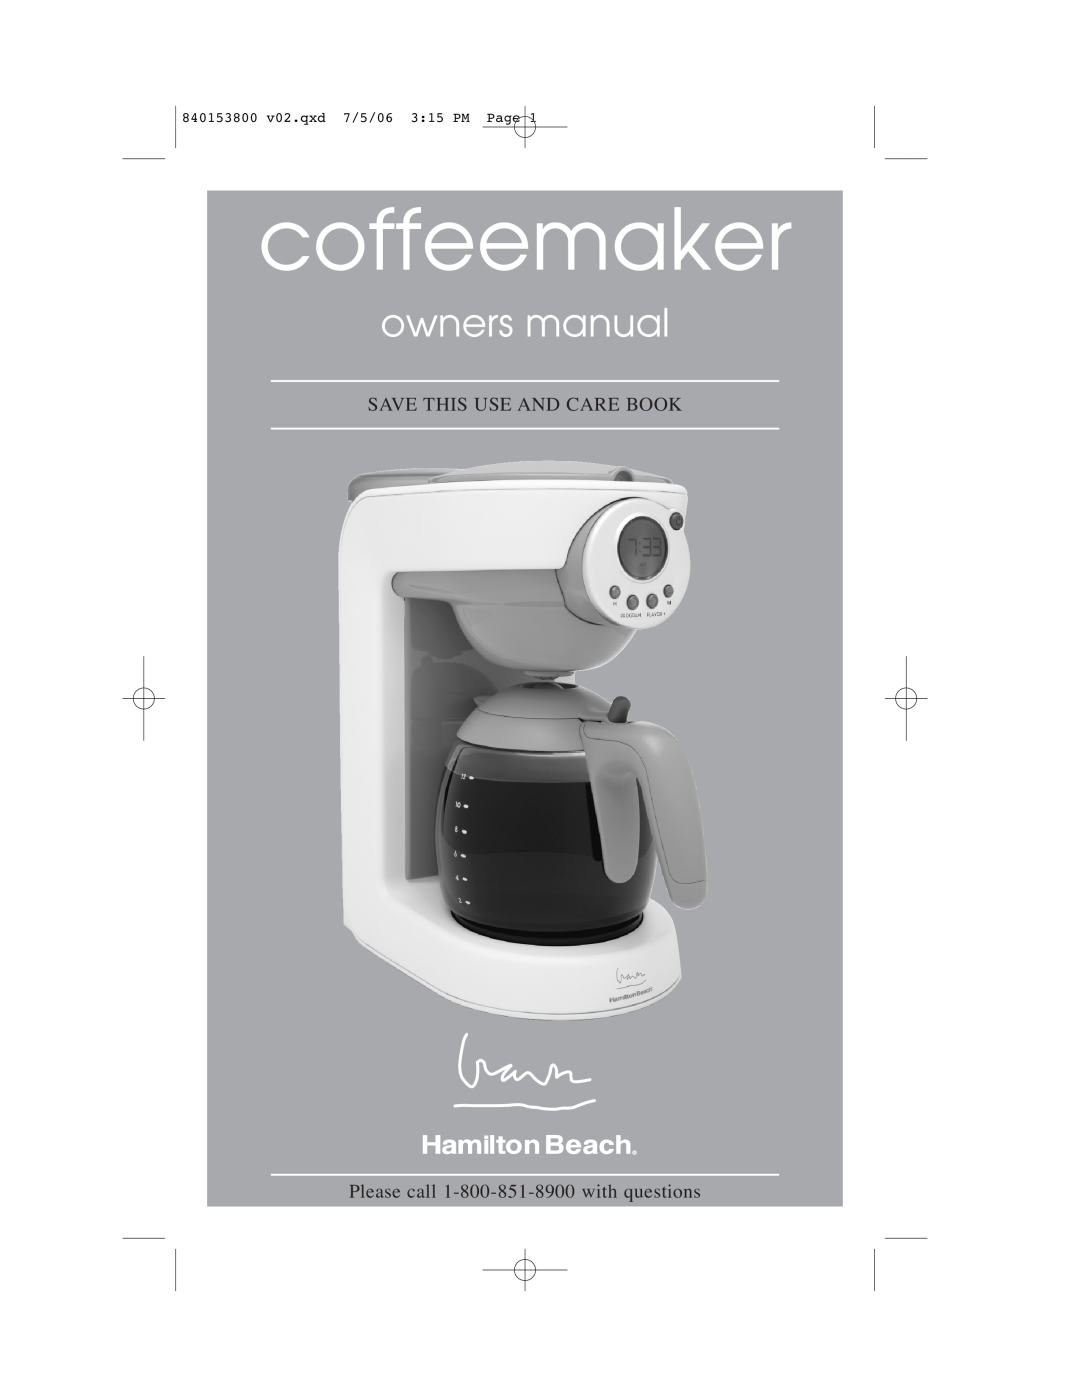 Hamilton Beach 840153800 owner manual coffeemaker, Save This Use And Care Book, Please call 1-800-851-8900 with questions 